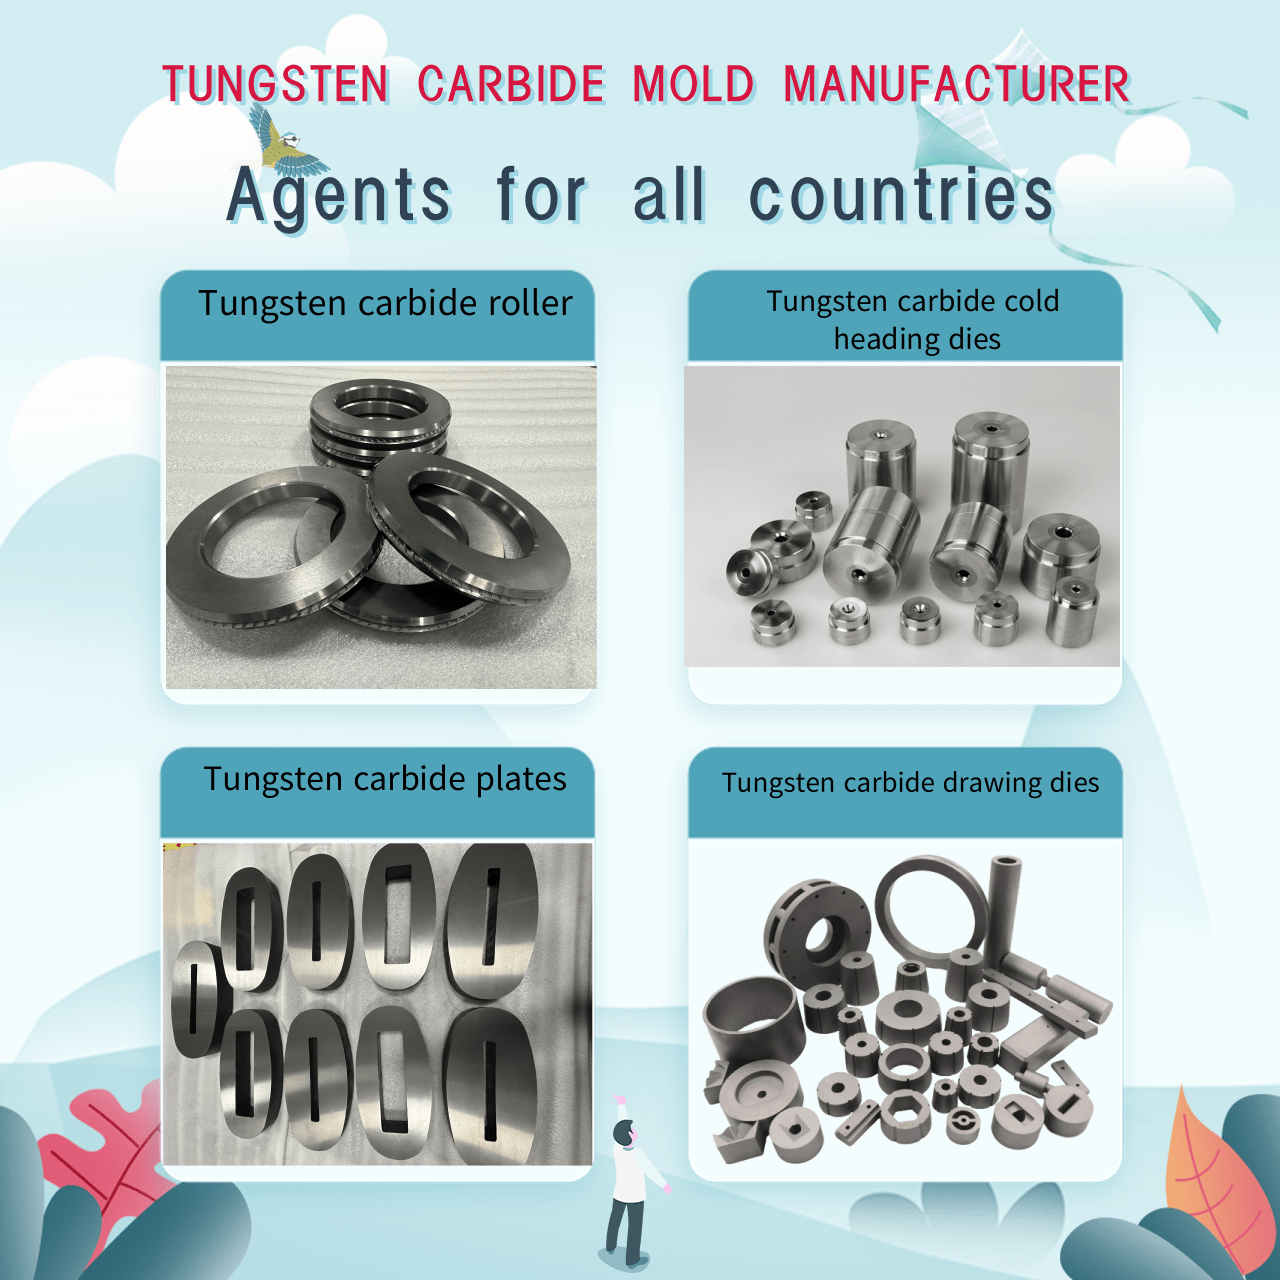 Why tungsten carbide is the ideal tool material